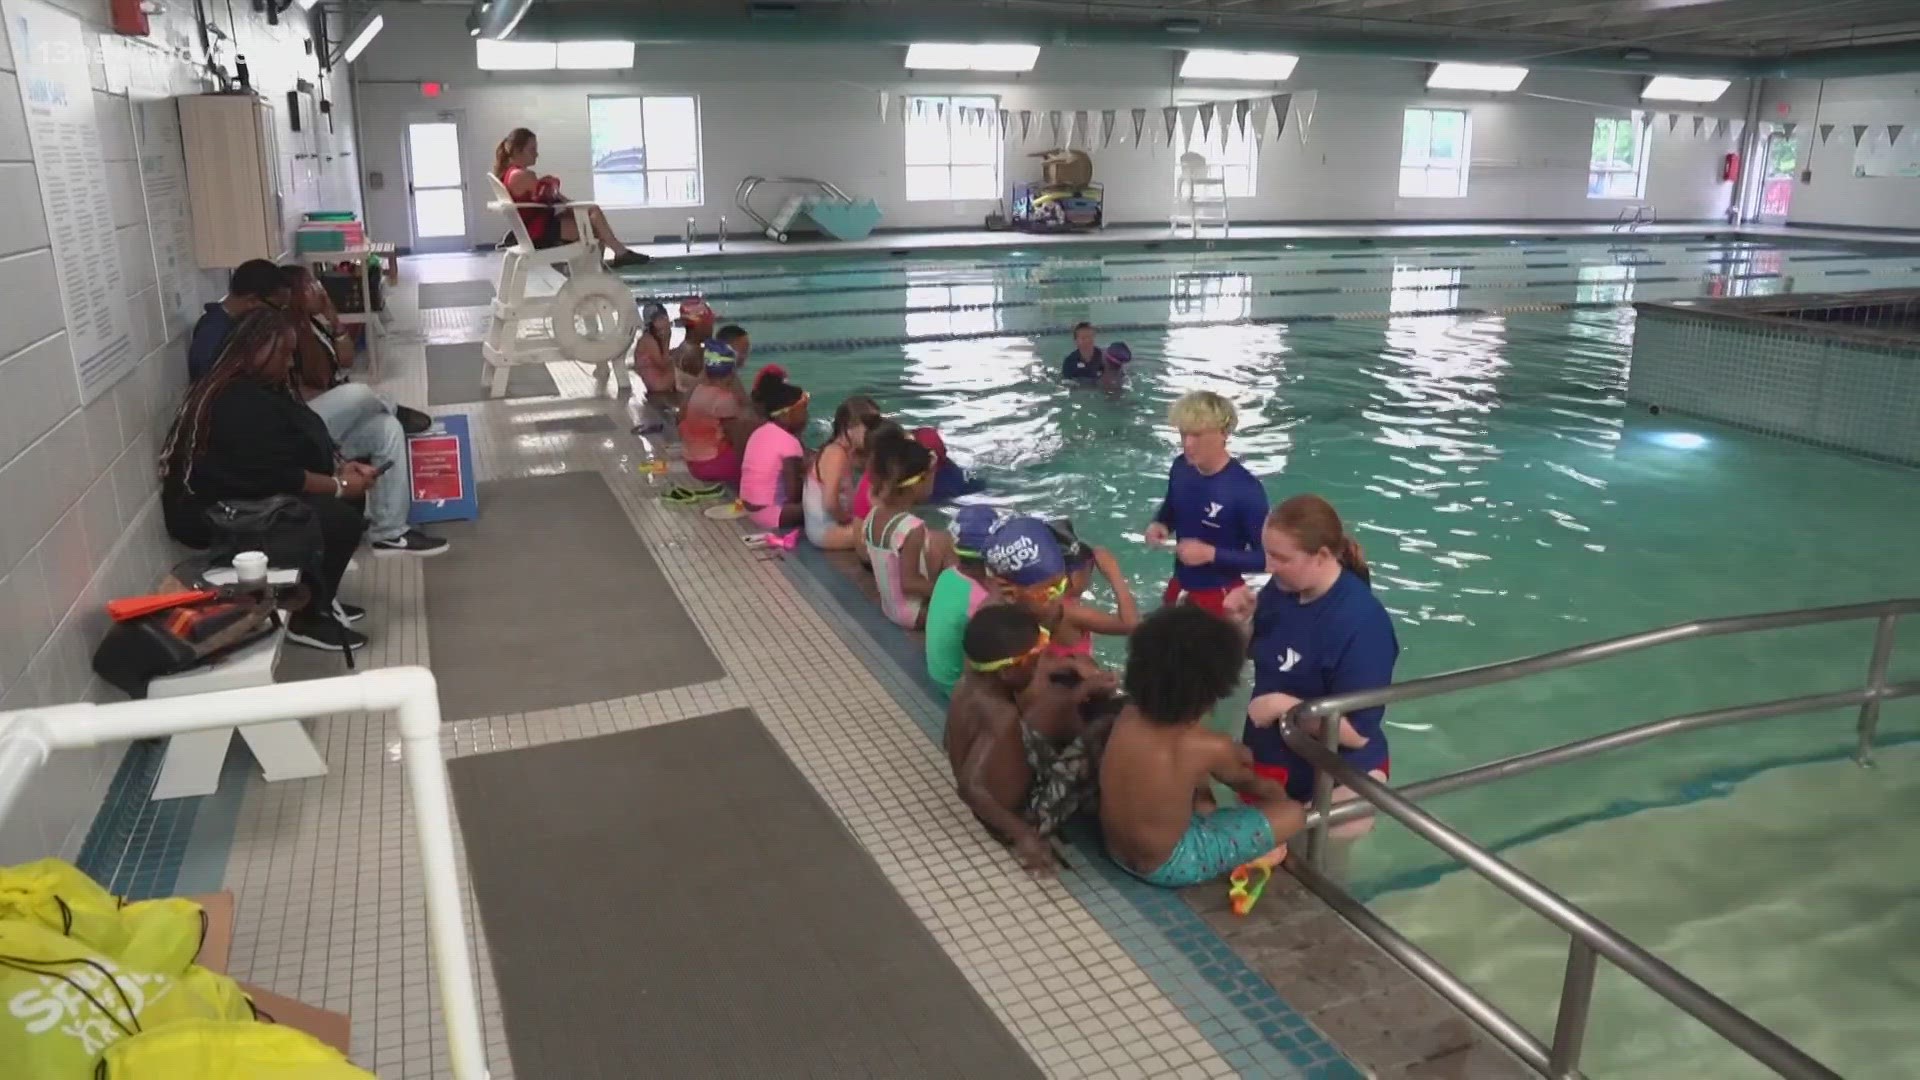 The YMCA of South Hampton Roads made an effort to help with free water safety lessons for kids.